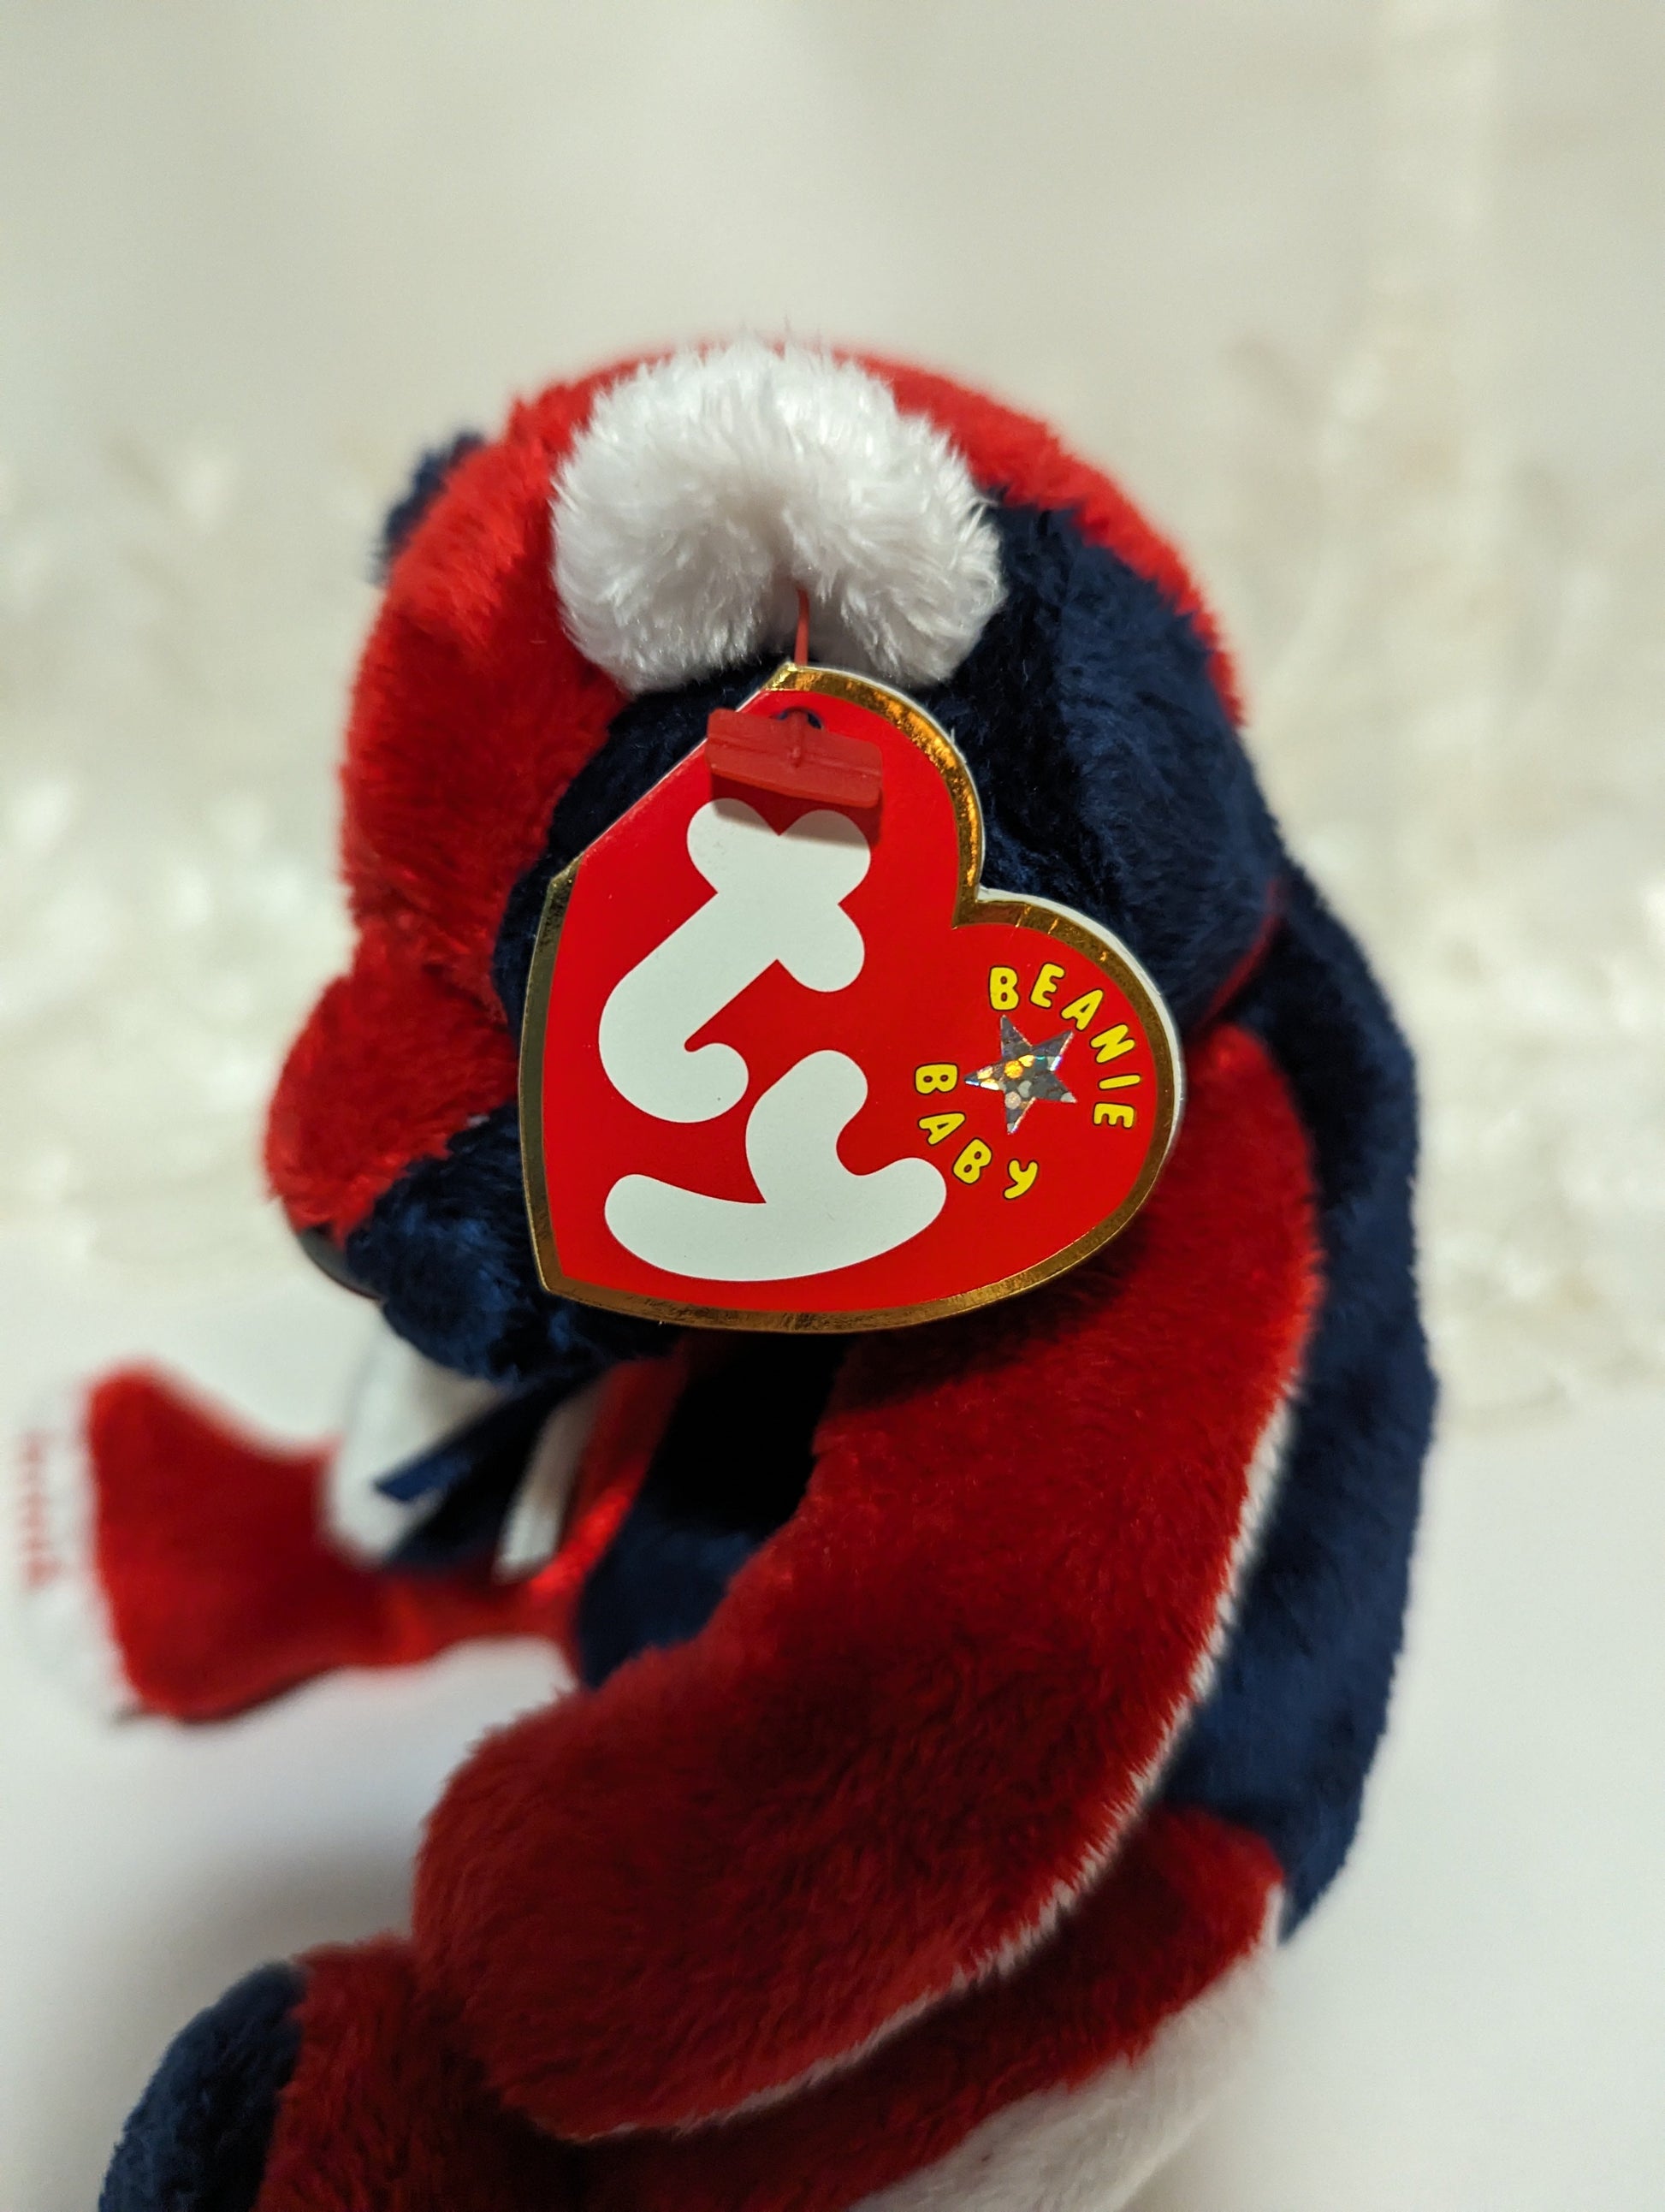 Ty Beanie Baby - Patriot The Bear (7in) - Vintage Beanies Canada